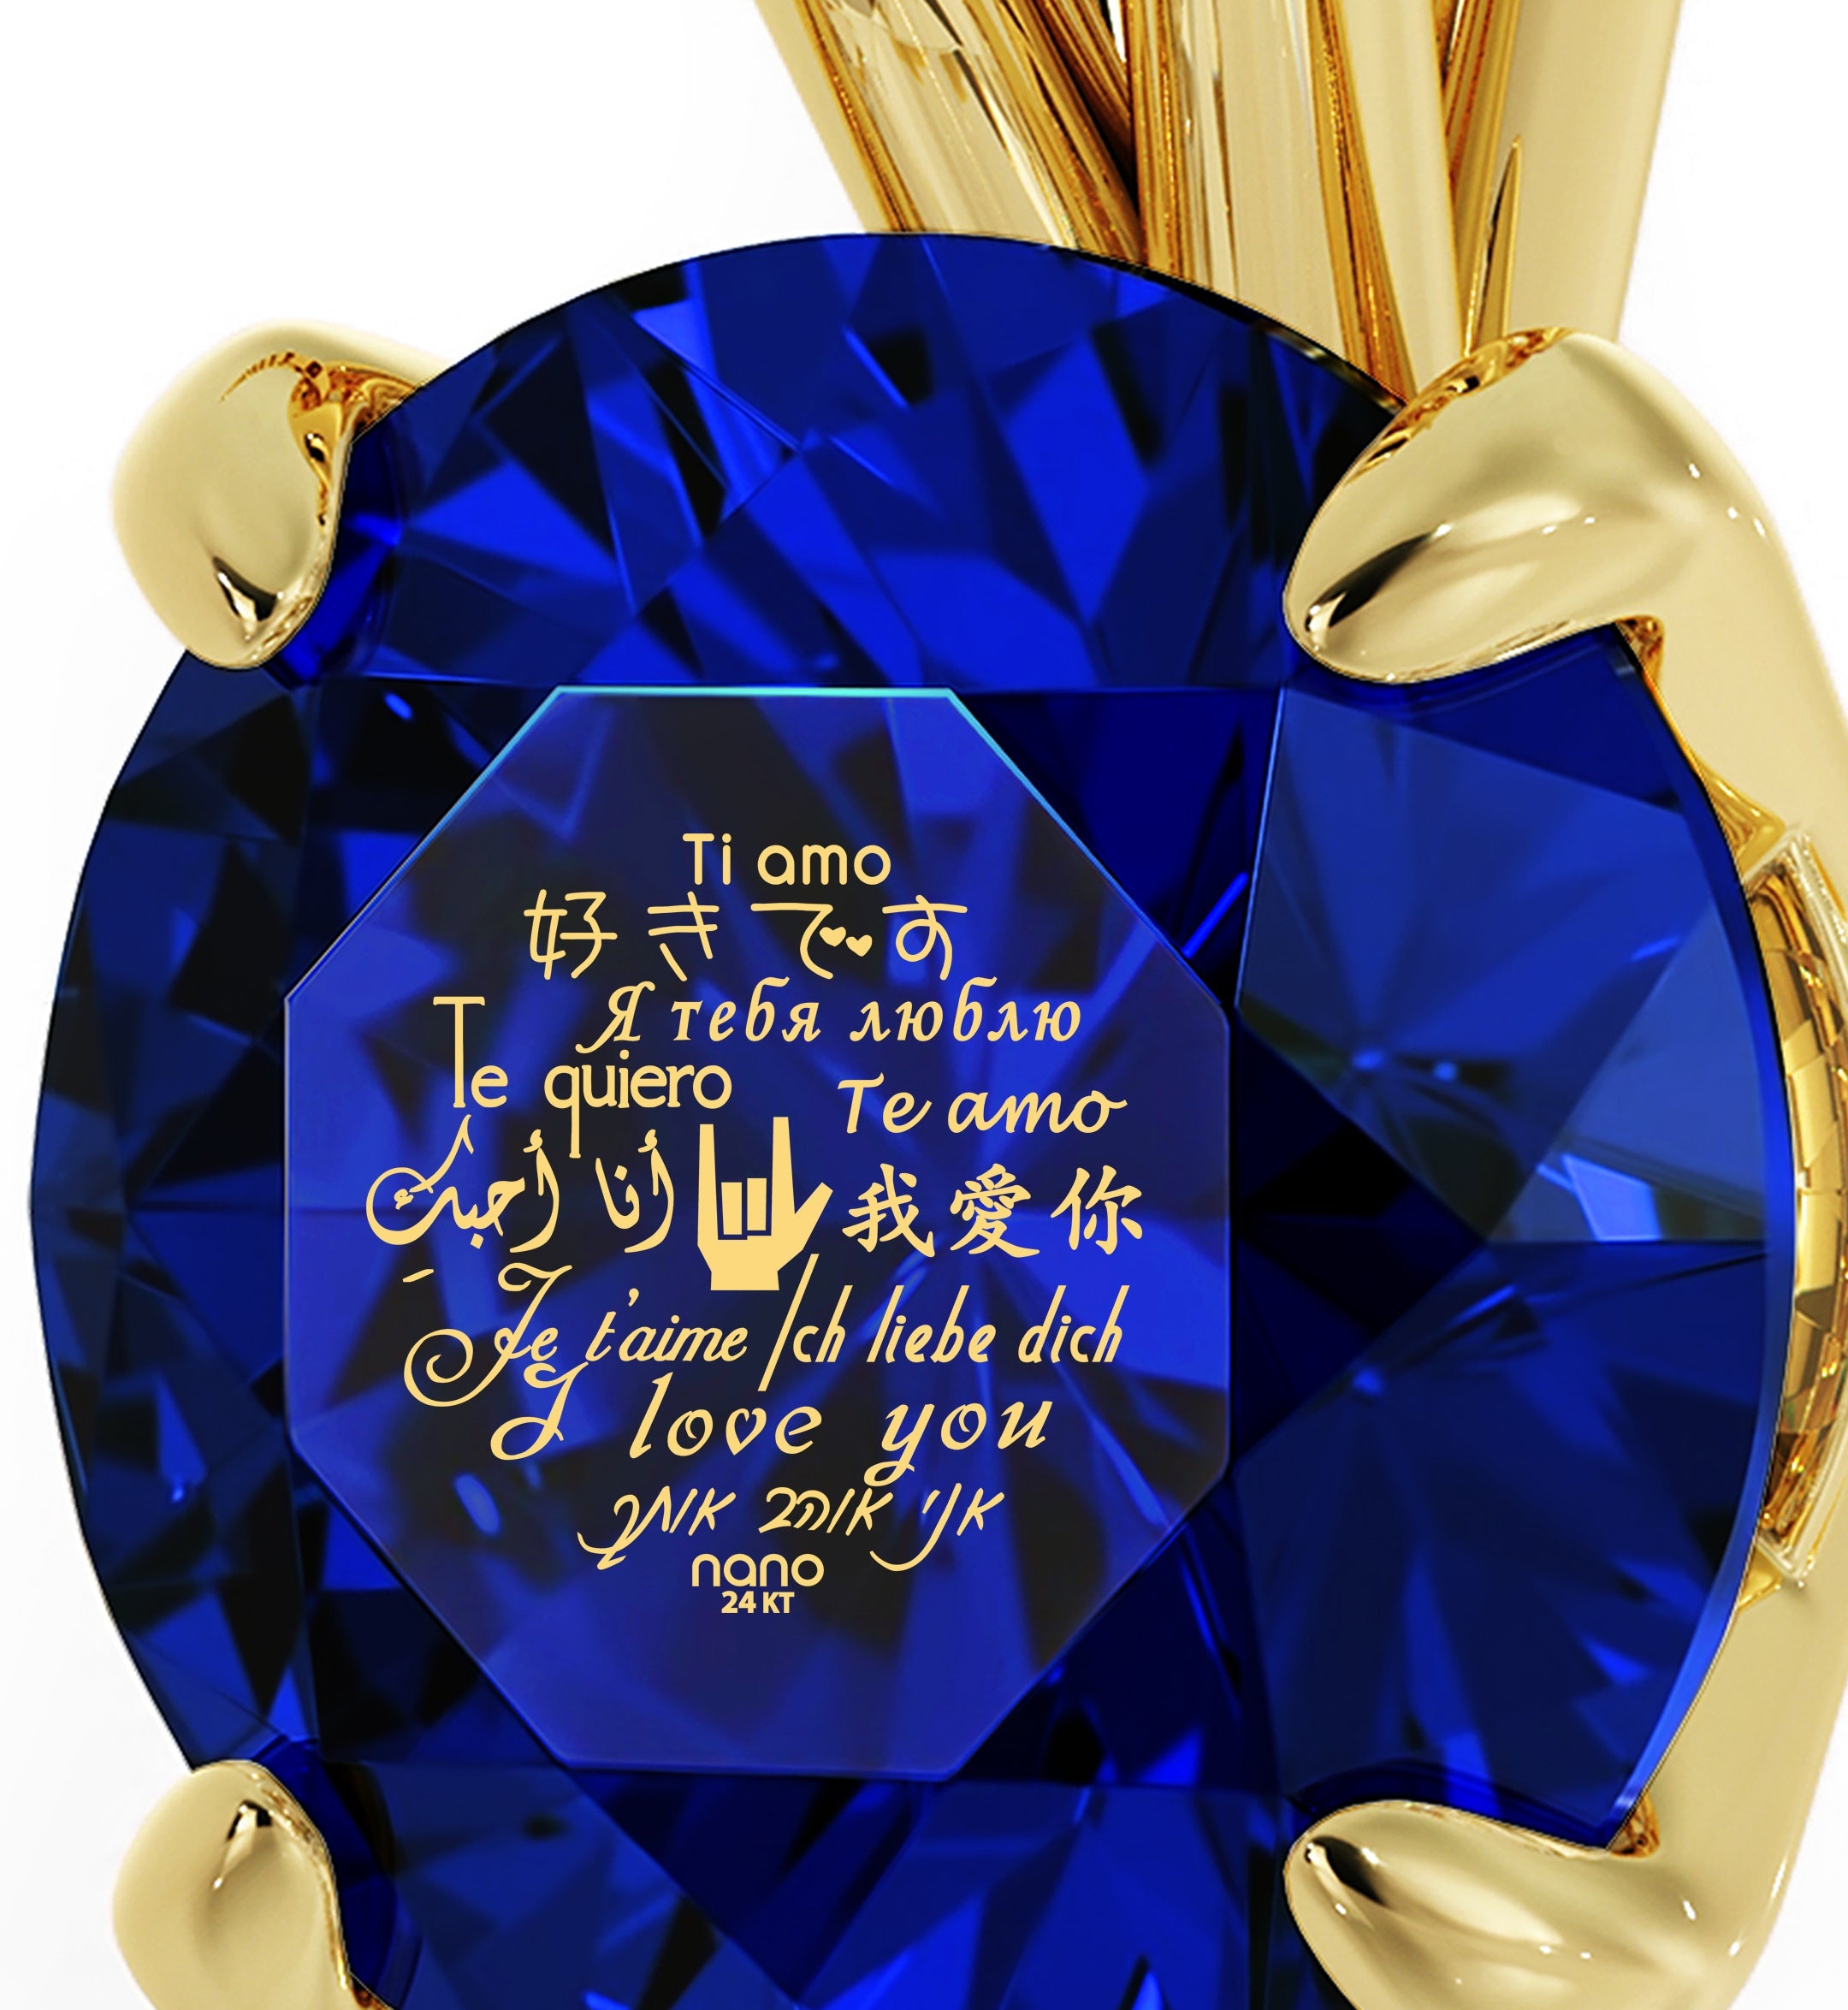 A close-up of a large Swarovski crystal held by a gold prong setting, with Gold Plated Silver I Love You Necklace Solitaire Pendant 12 Languages 24k Gold Inscribed written in multiple languages overlaying the gem.